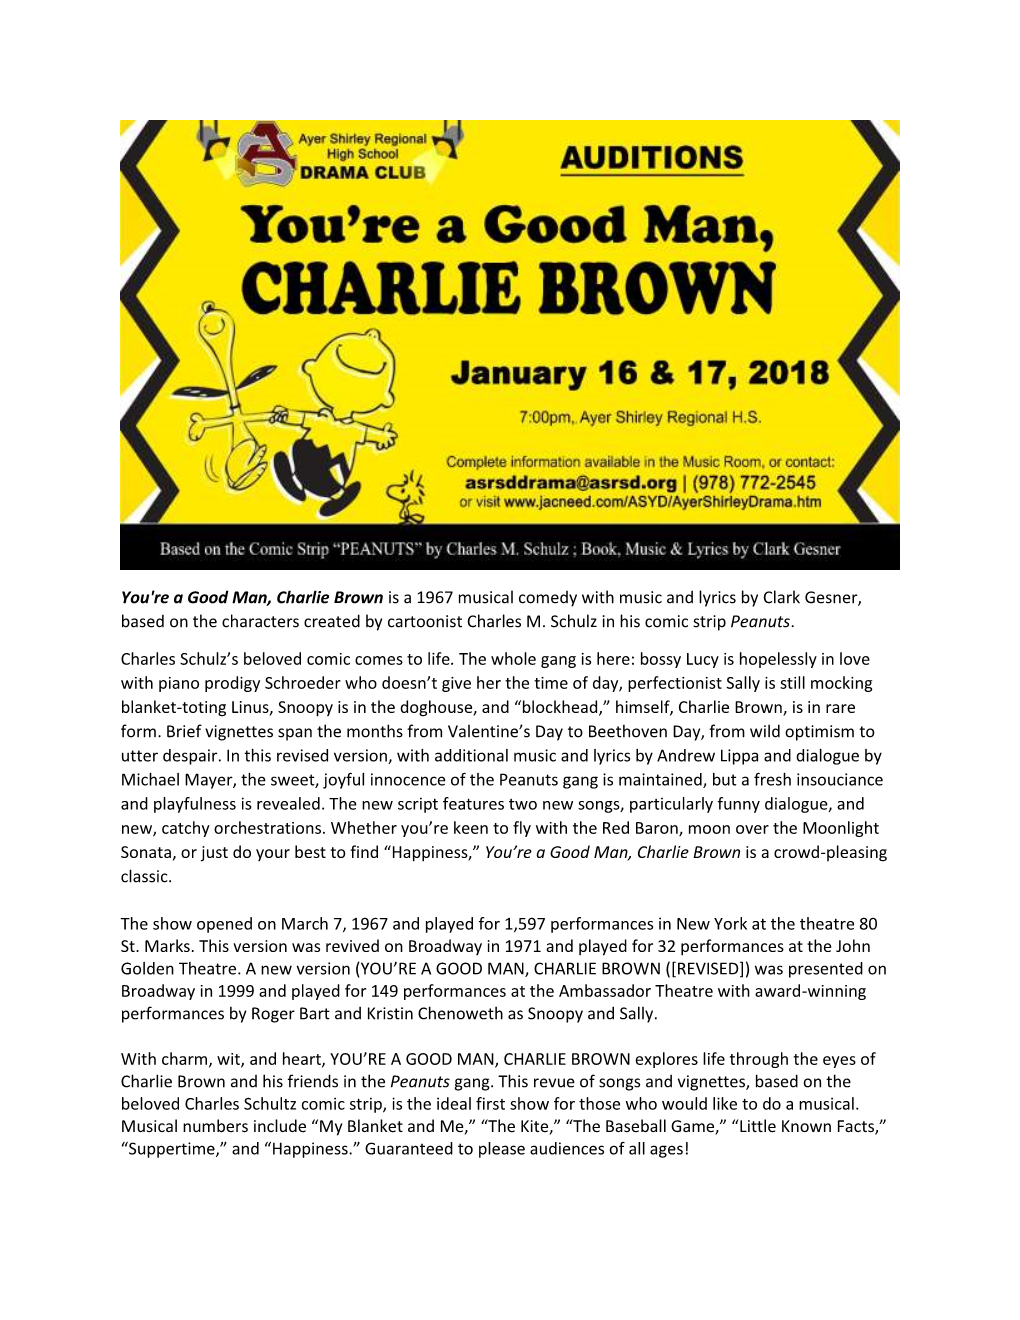 You're a Good Man, Charlie Brown Is a 1967 Musical Comedy with Music and Lyrics by Clark Gesner, Based on the Characters Created by Cartoonist Charles M